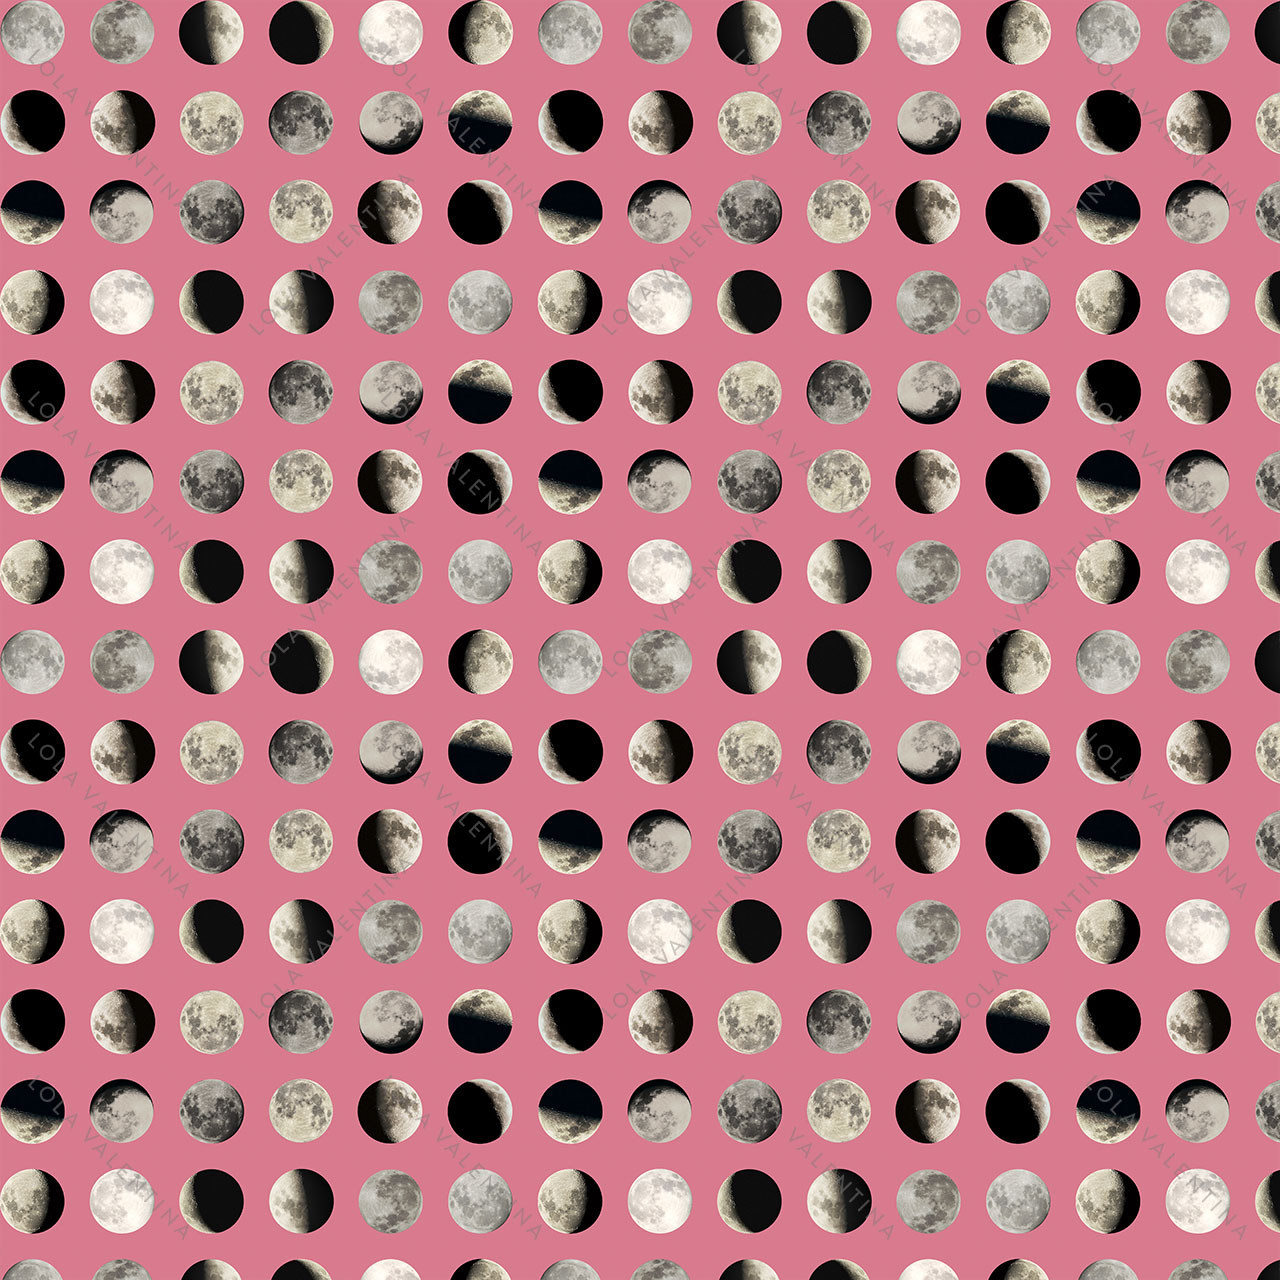 Pink-Luna-Moons-Celestial-Space-Cosmos-Pattern